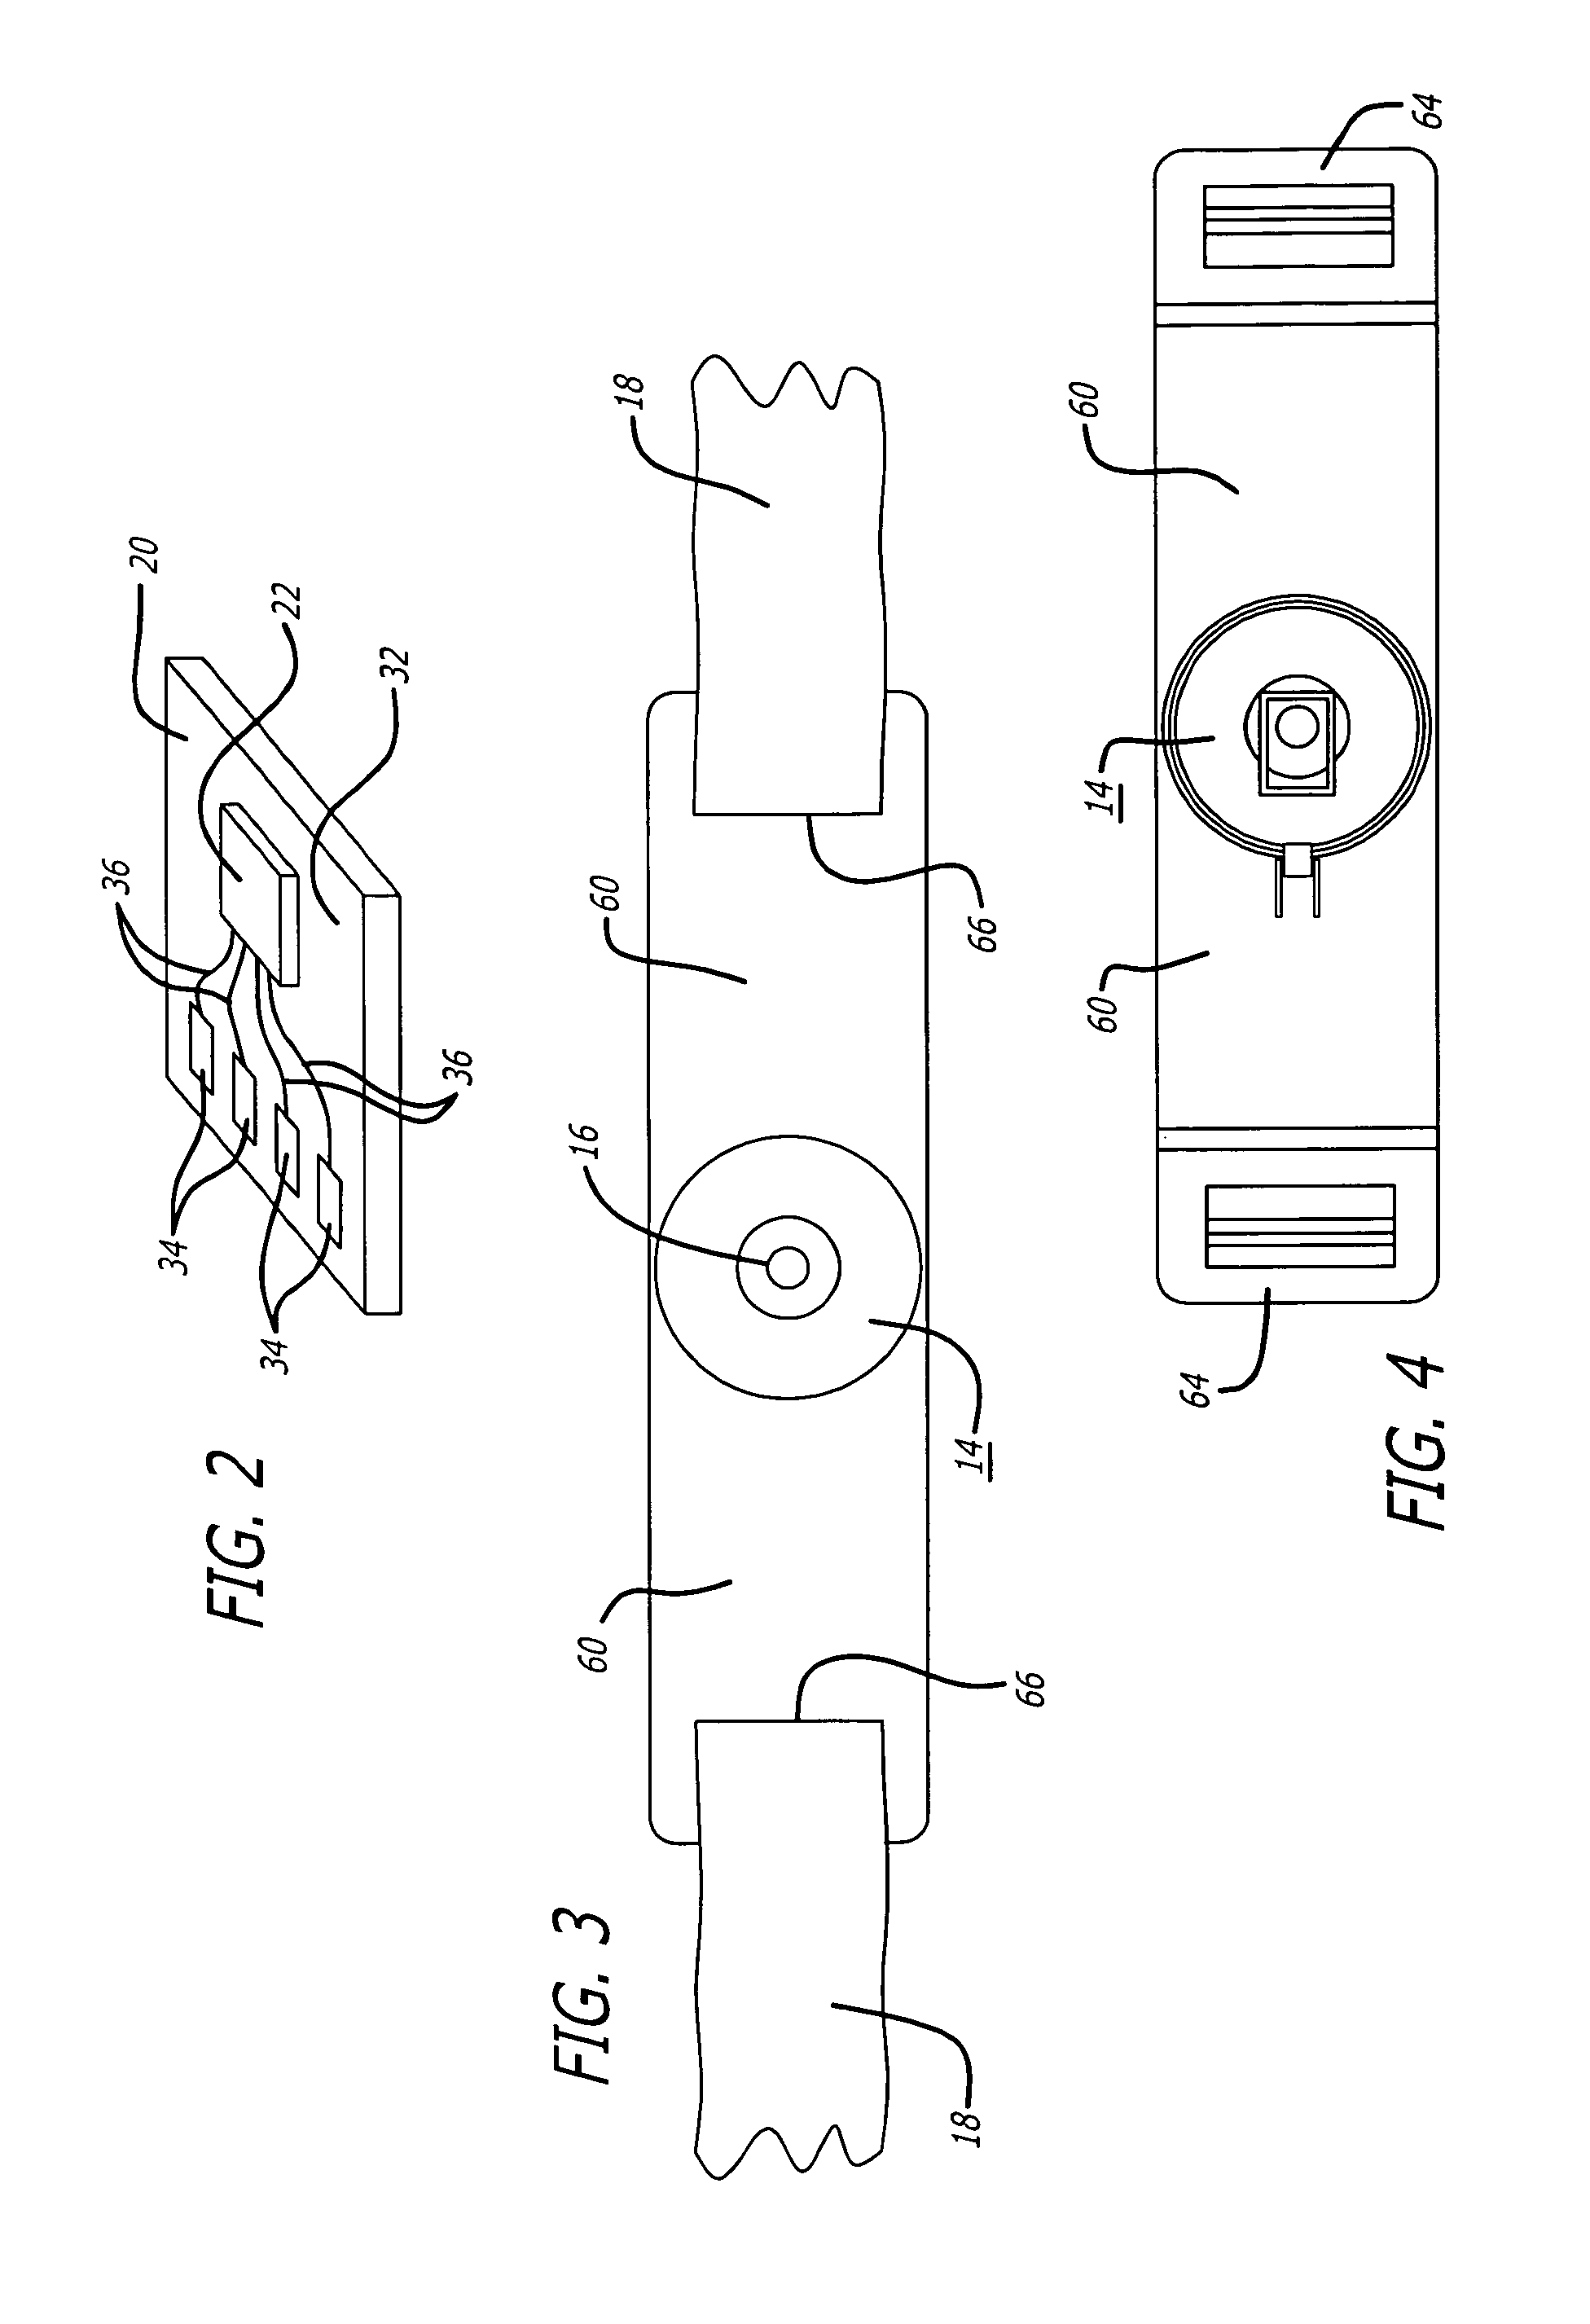 Uterine contraction sensing system and method